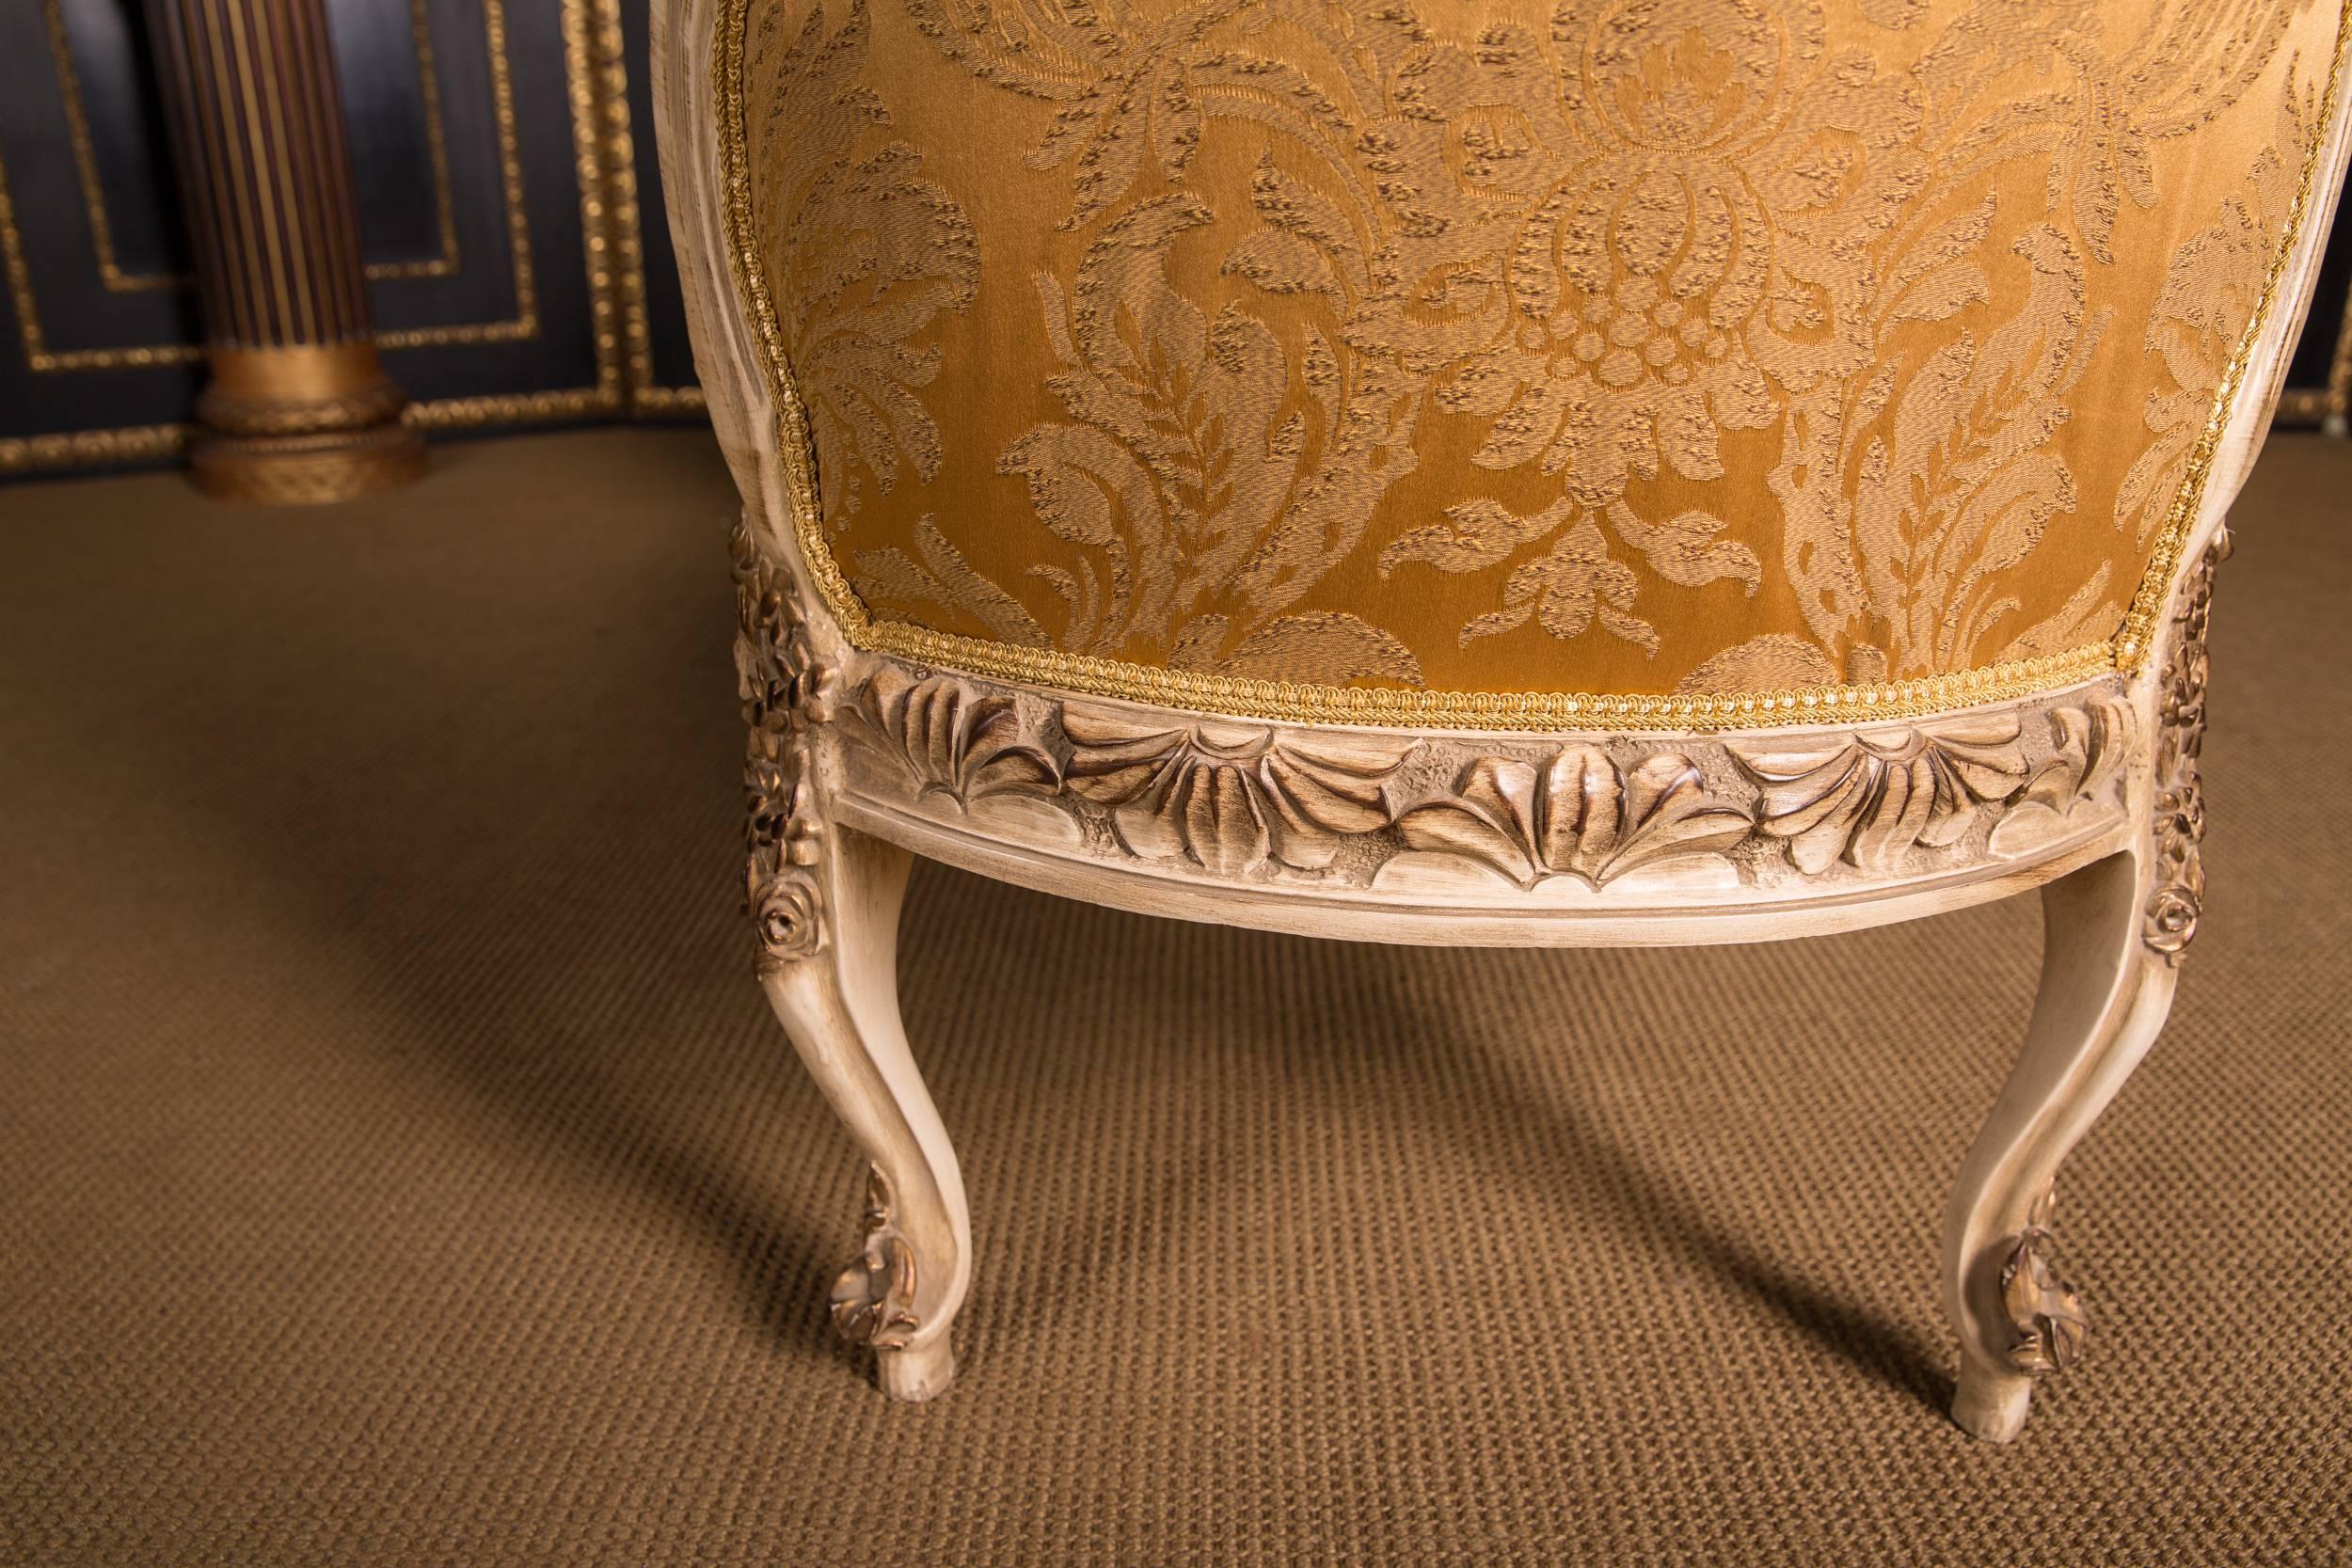 20th Century High Quality French Gondola Stool in Louis Quinze Style